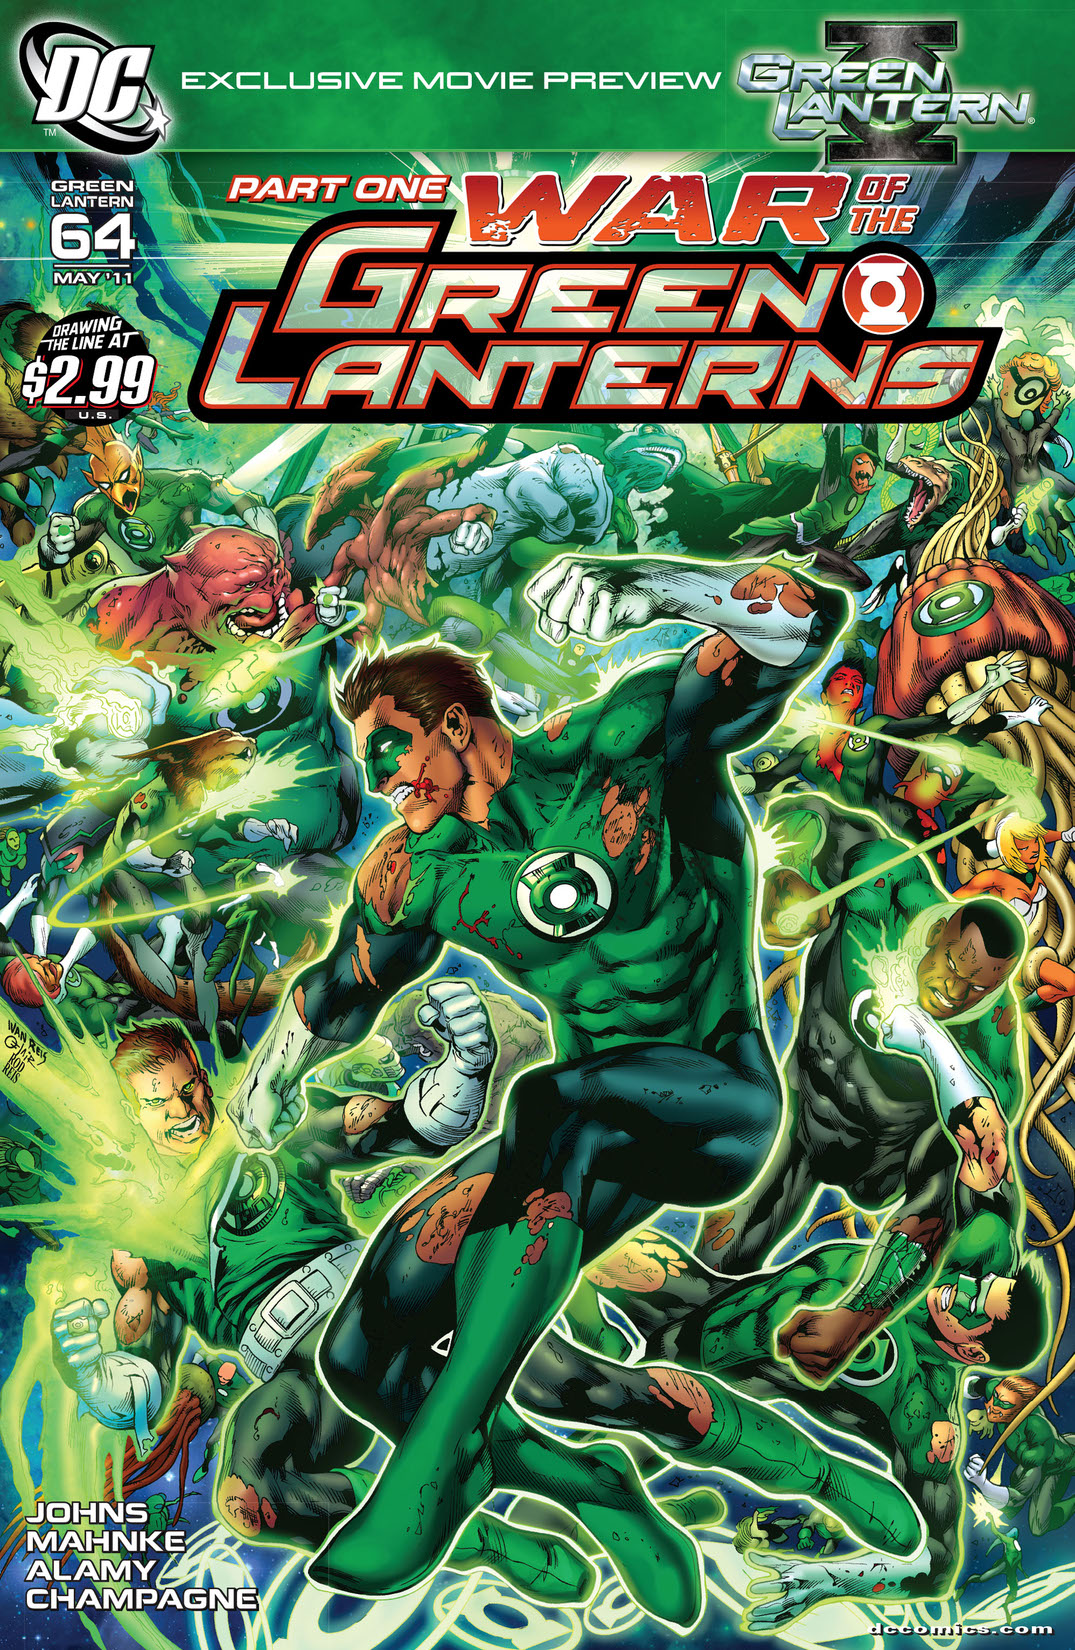 Green Lantern (2005-) #64 preview images